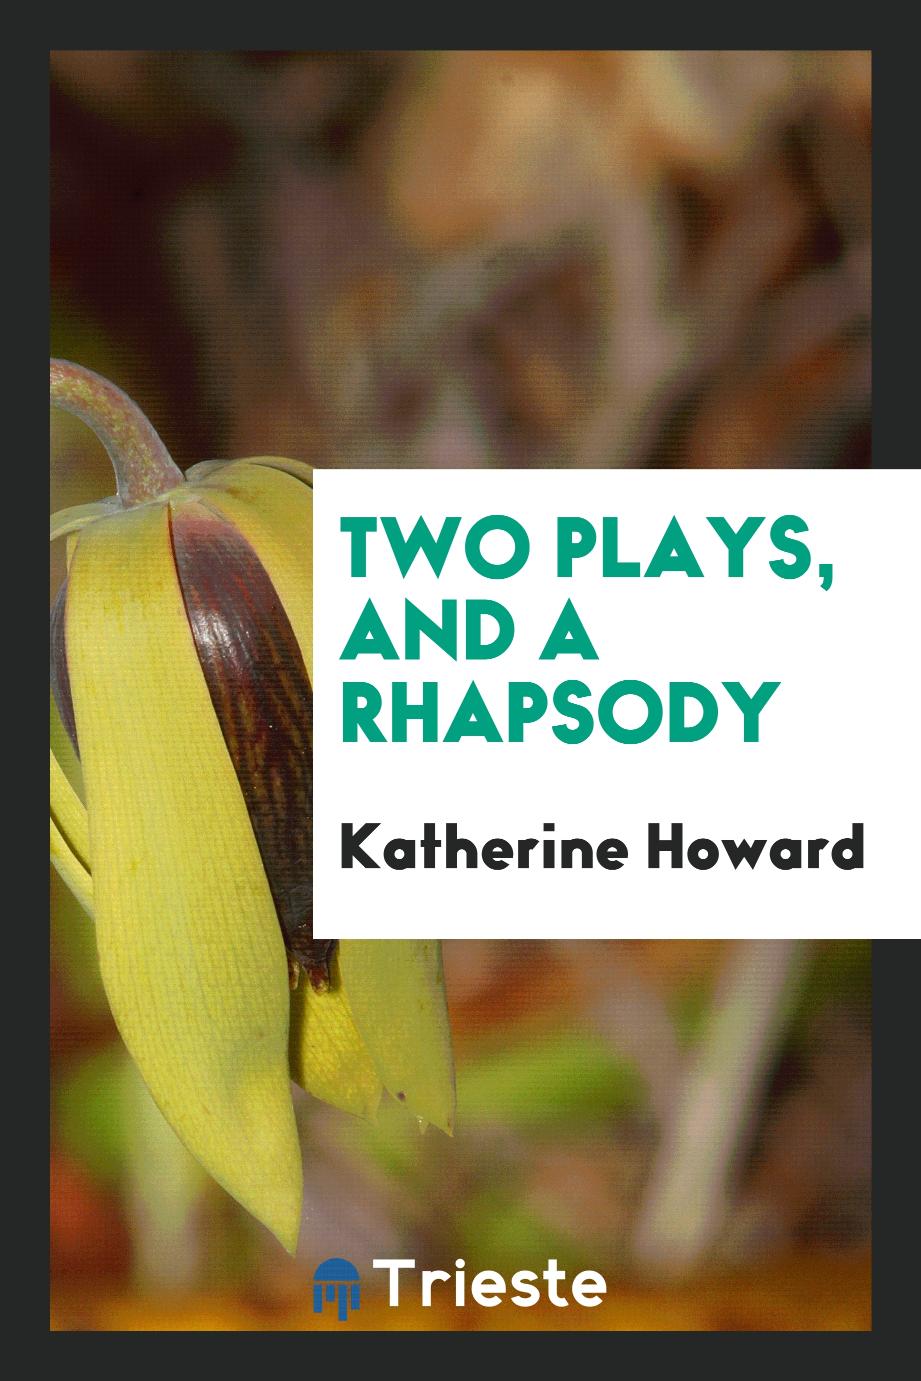 Two plays, and a rhapsody